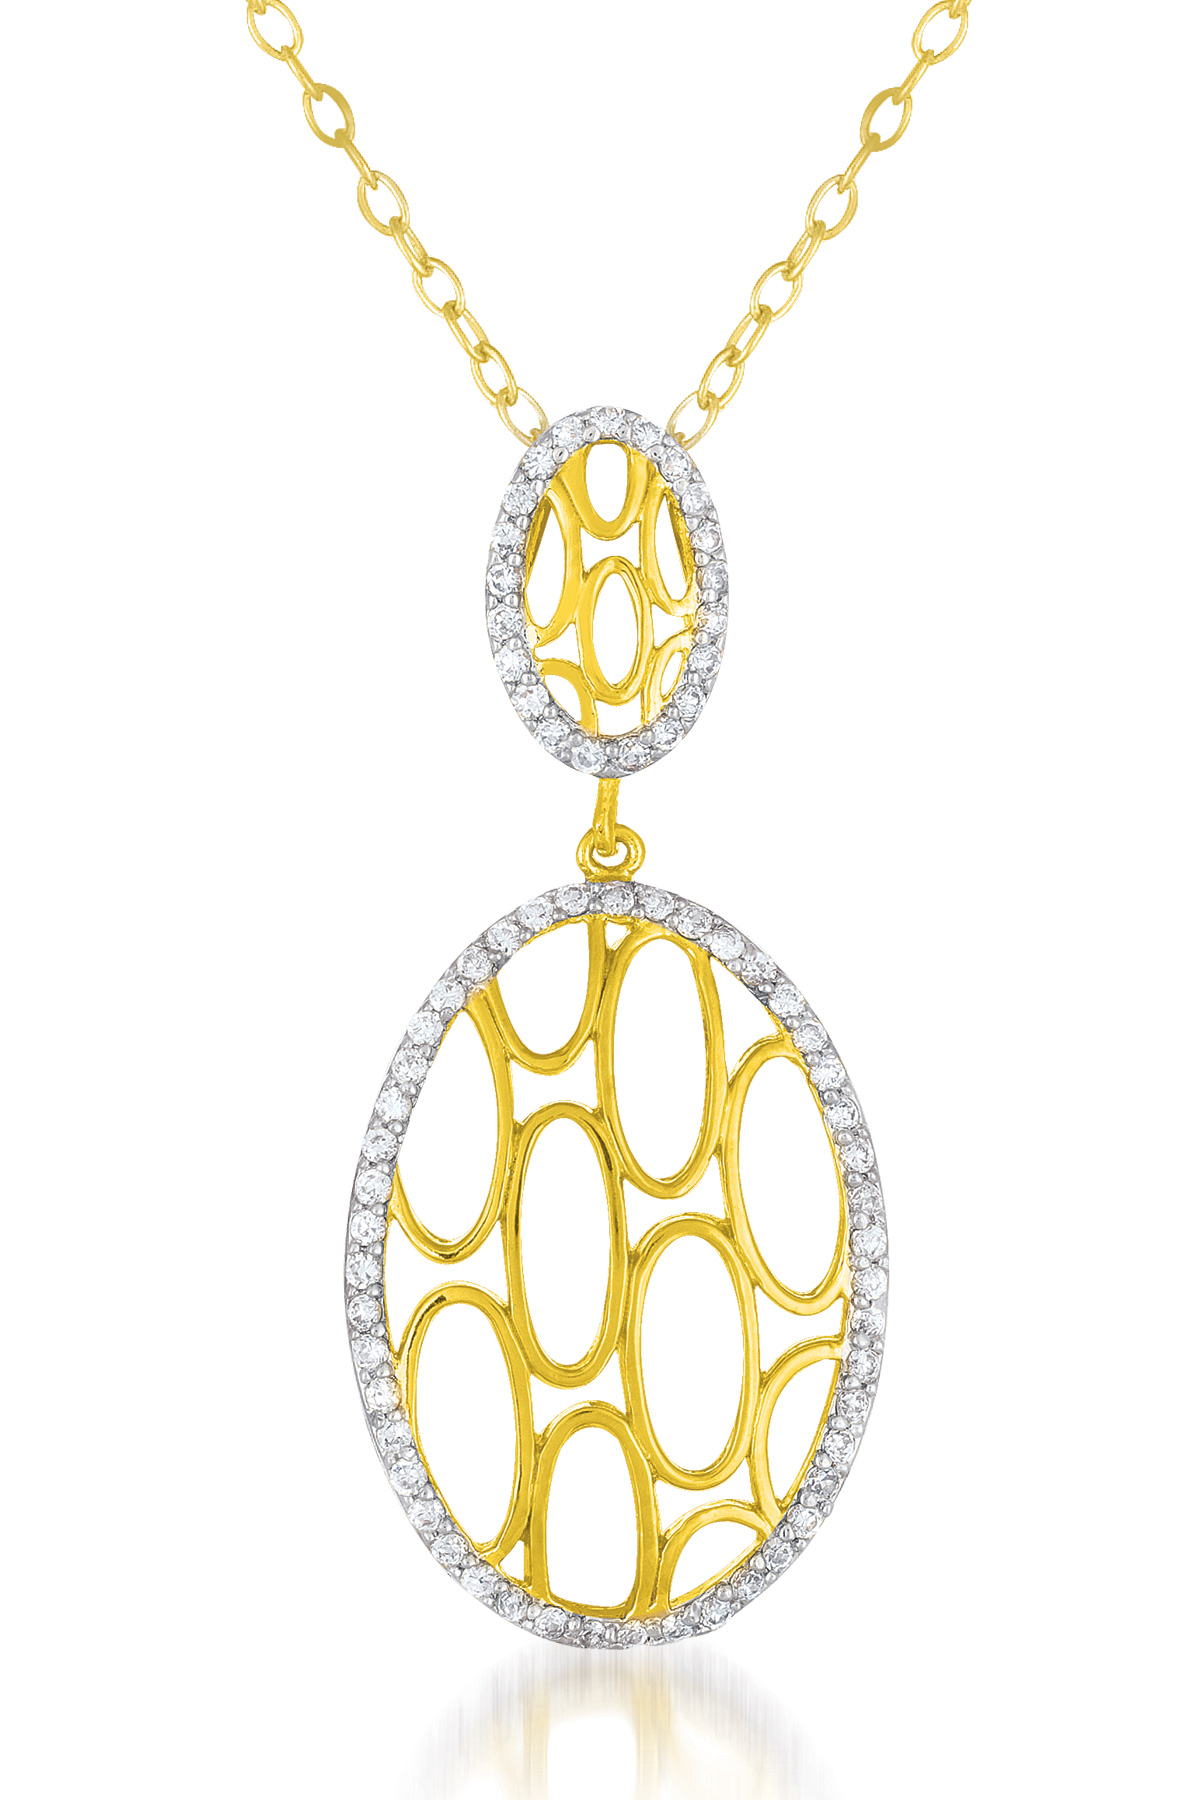 Cubic Zirconia (.925) Sterling Silver Gold Plated Oval Drop Pendant